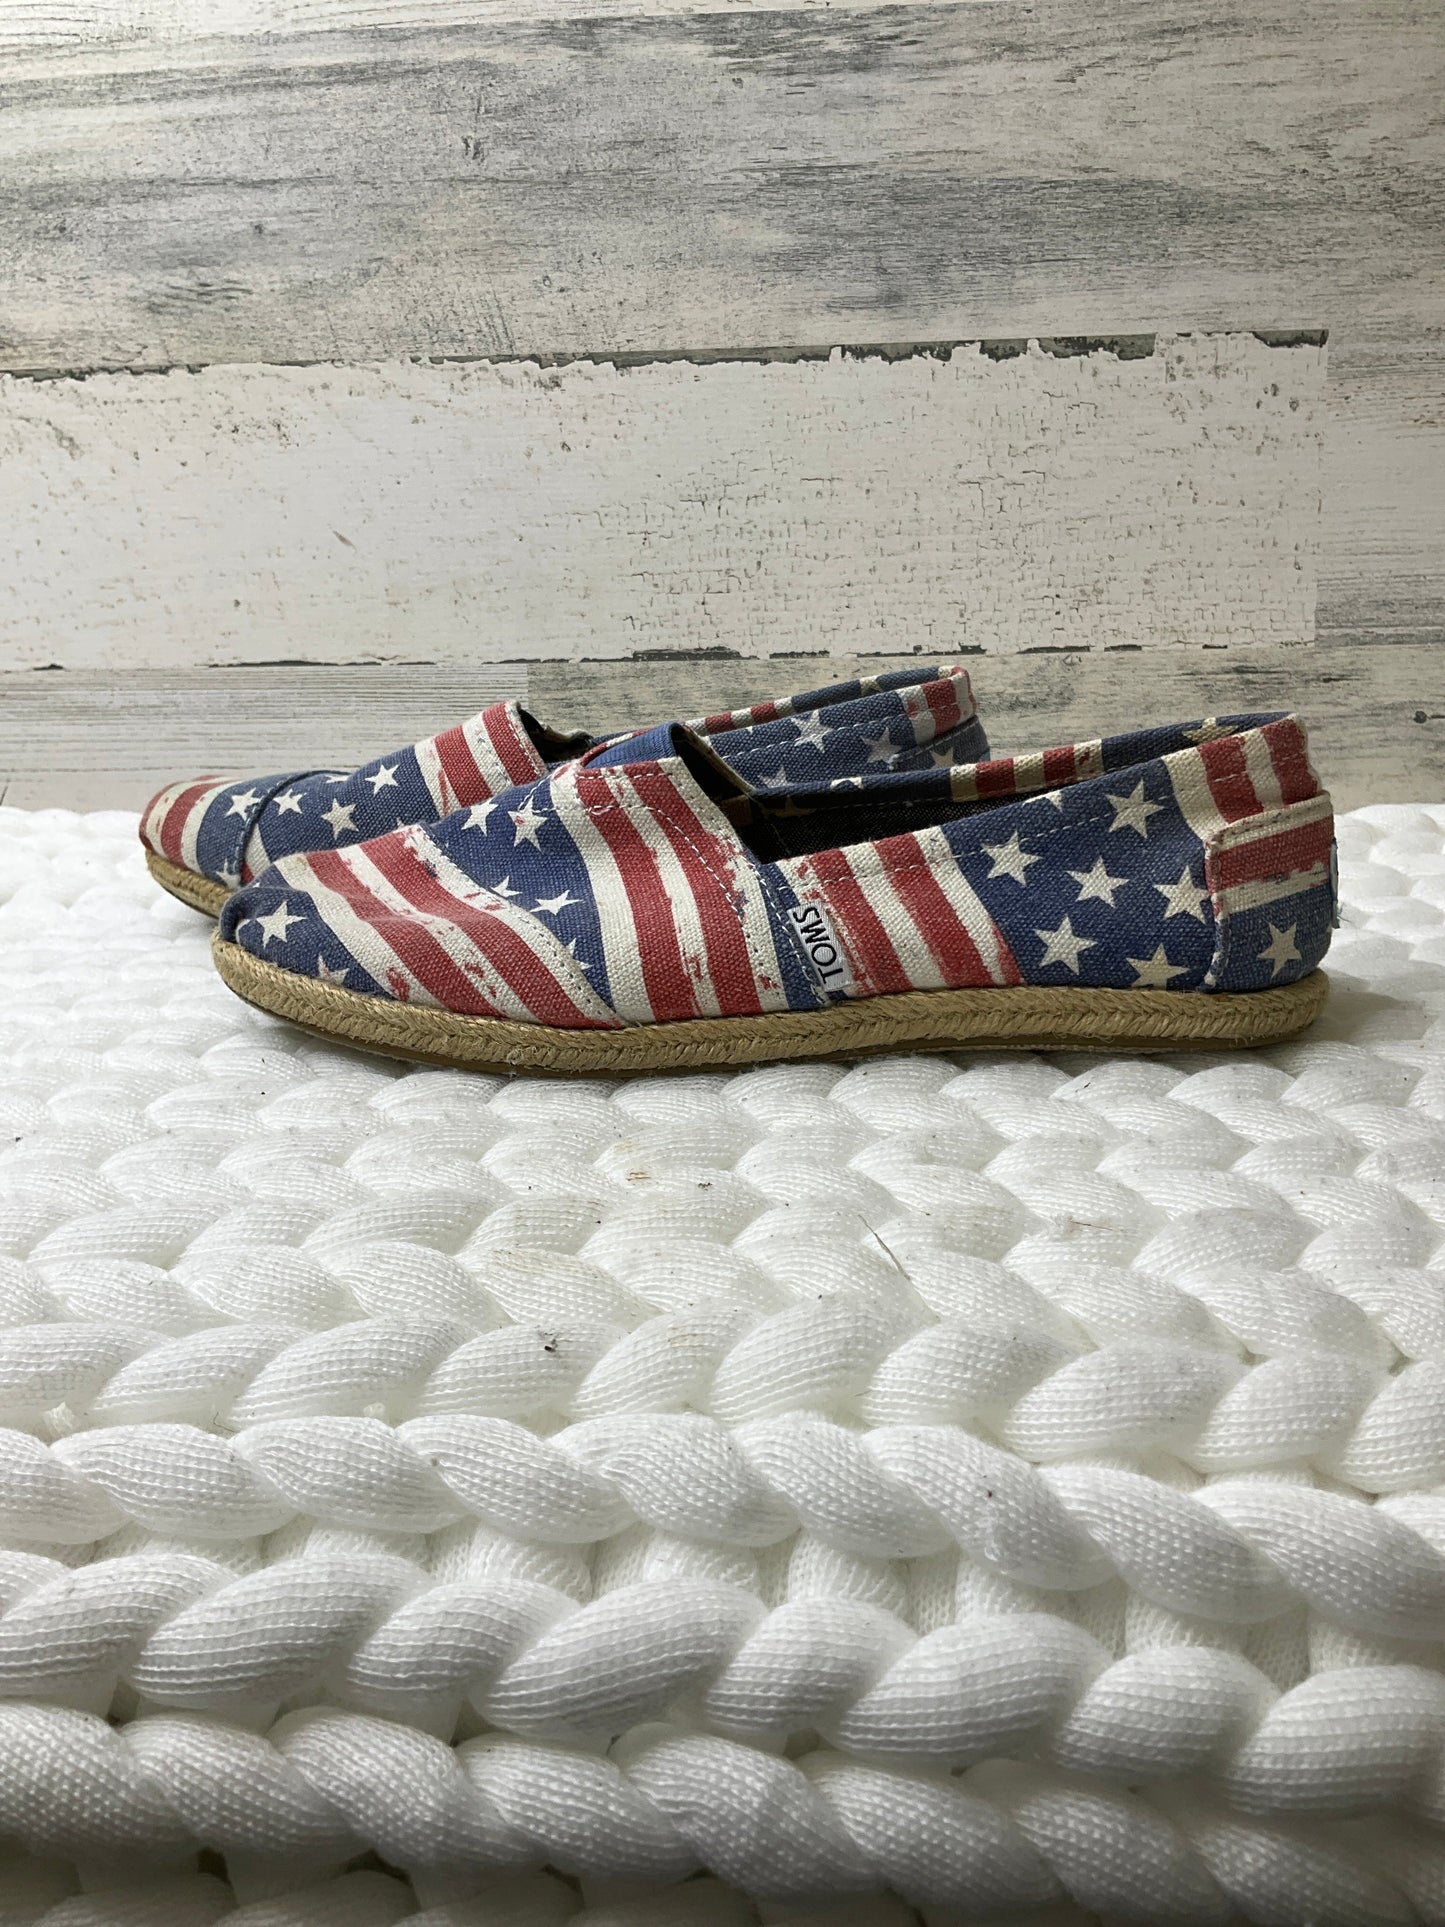 Shoes Flats By Toms  Size: 9.5